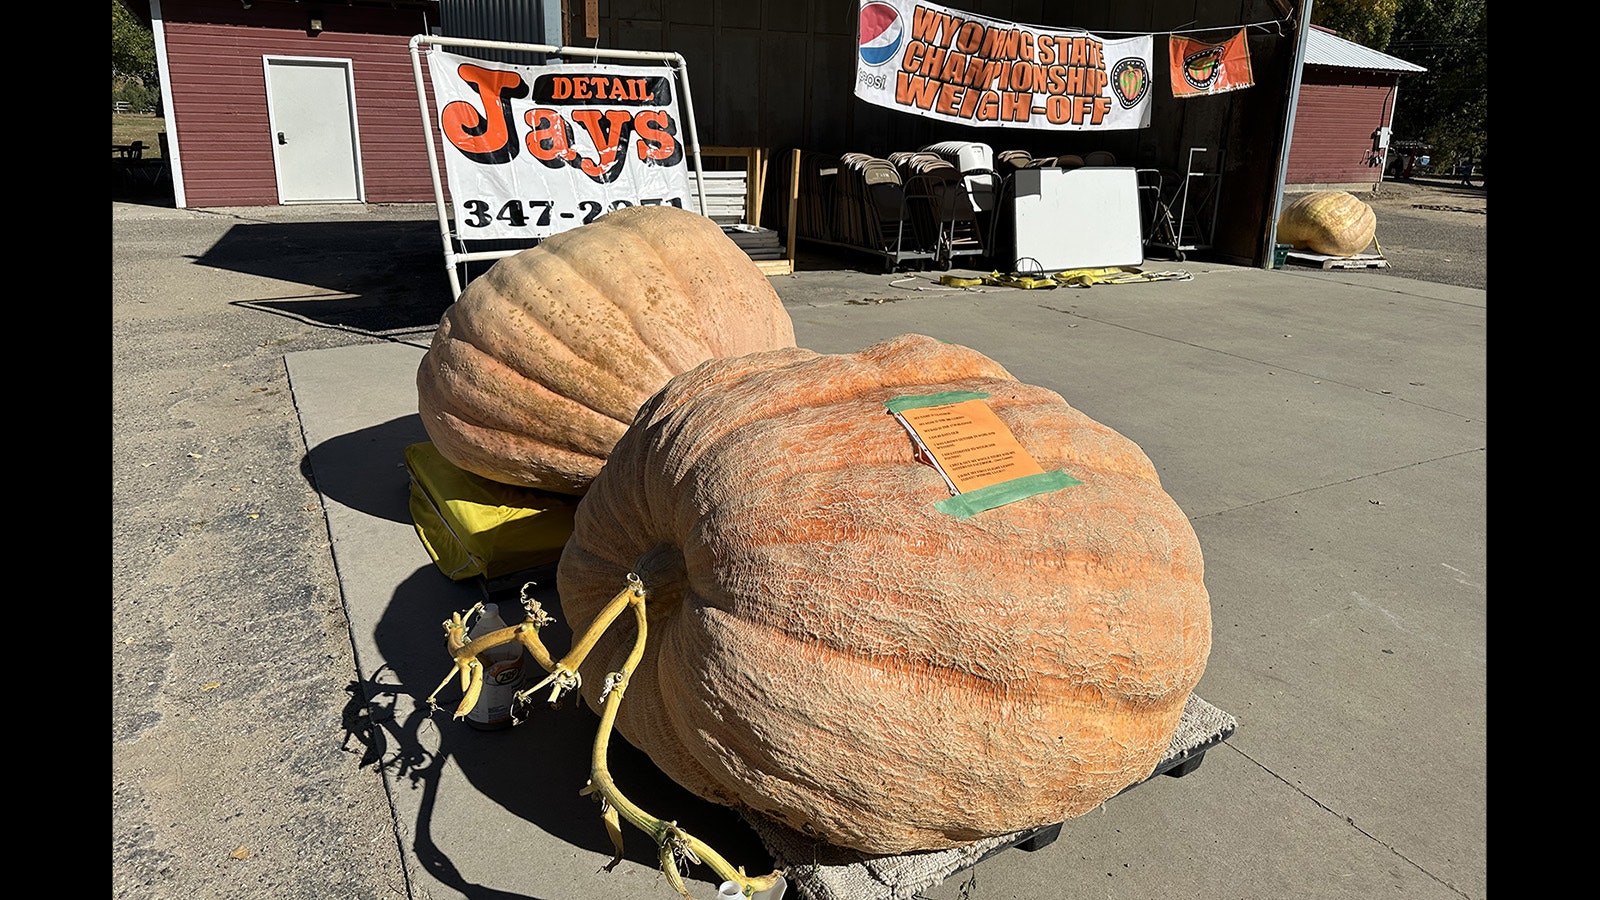 Two of the largest pumpkins grown in Wyoming this year.